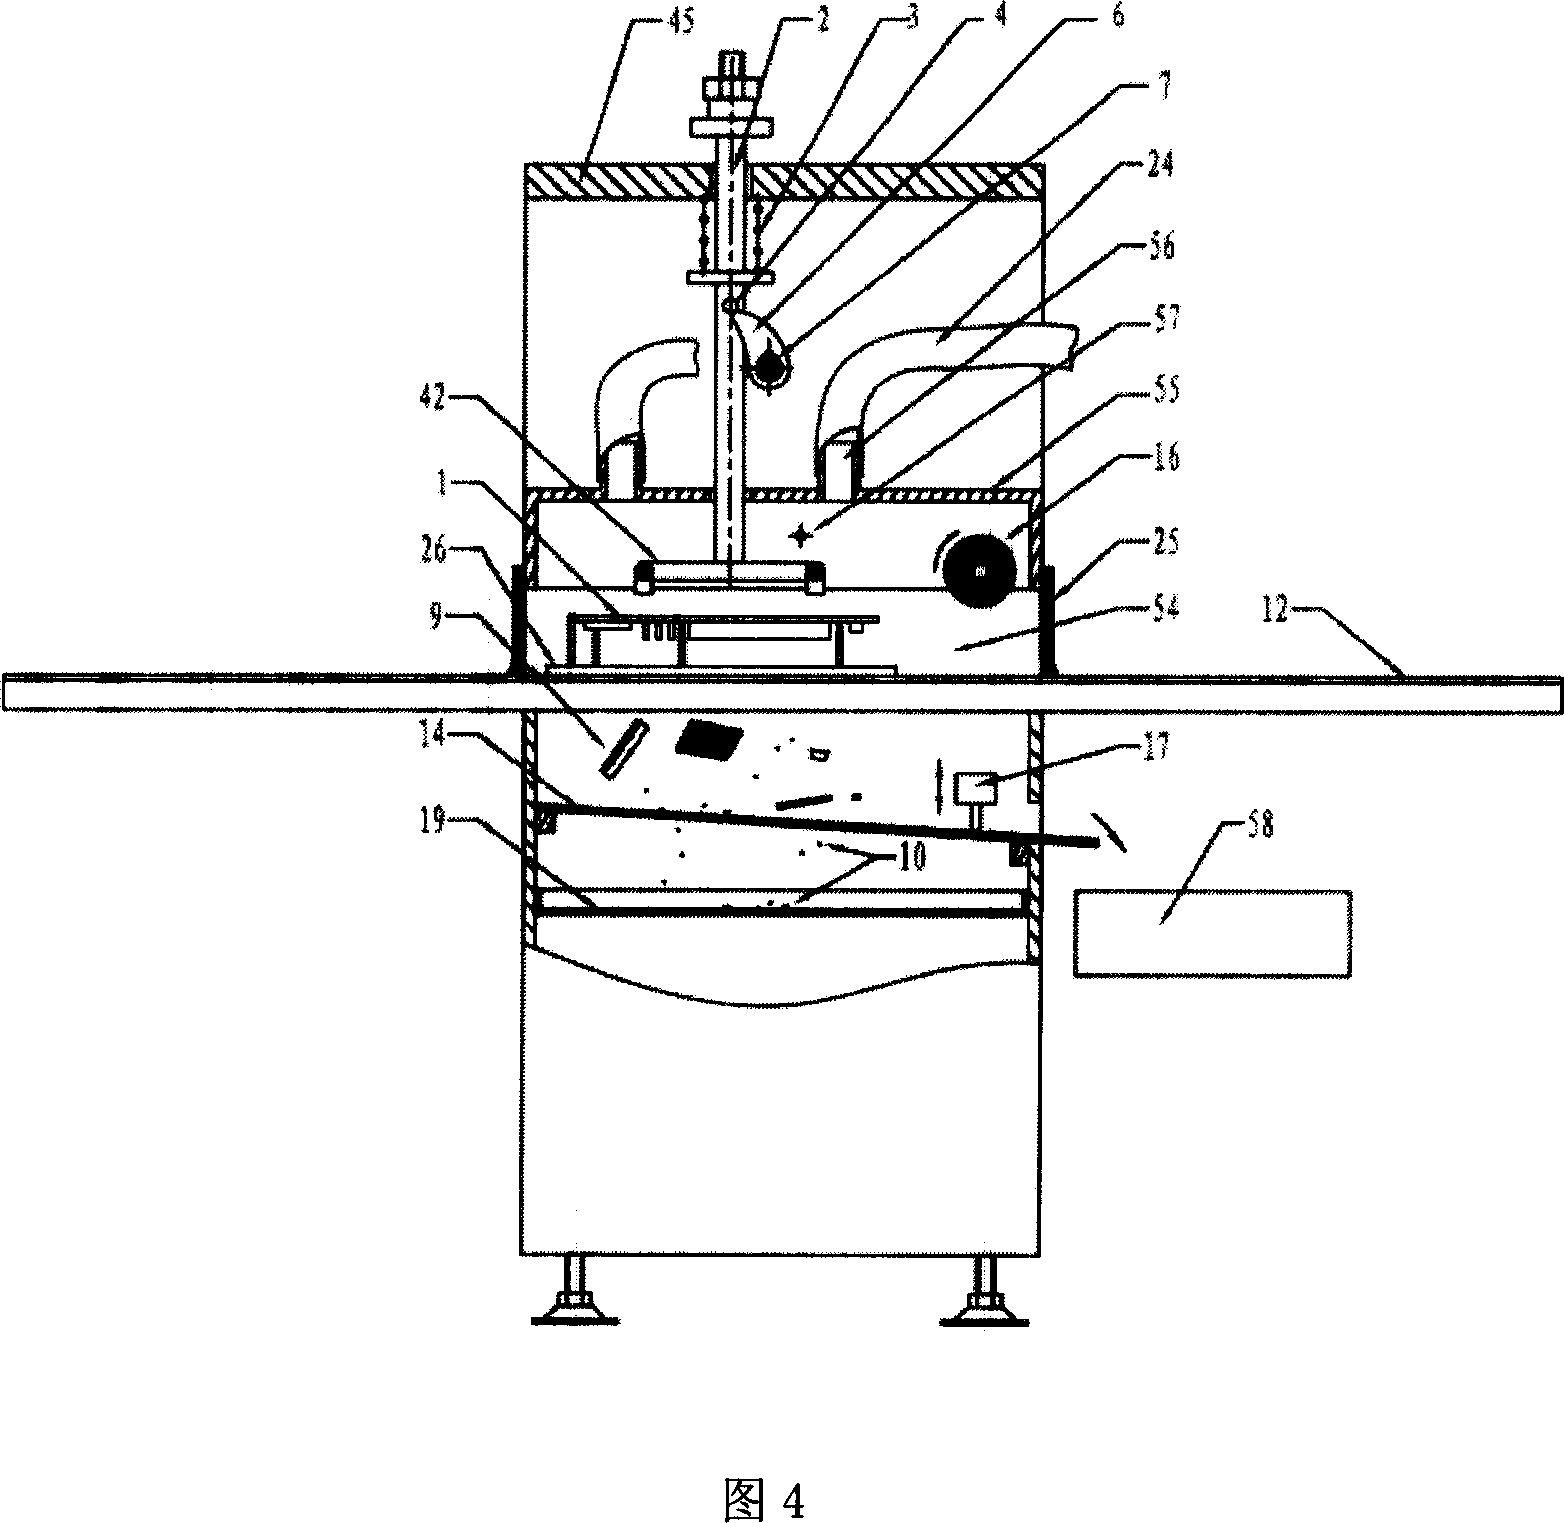 Method and equipment for disassembling circuit board using contacted impact